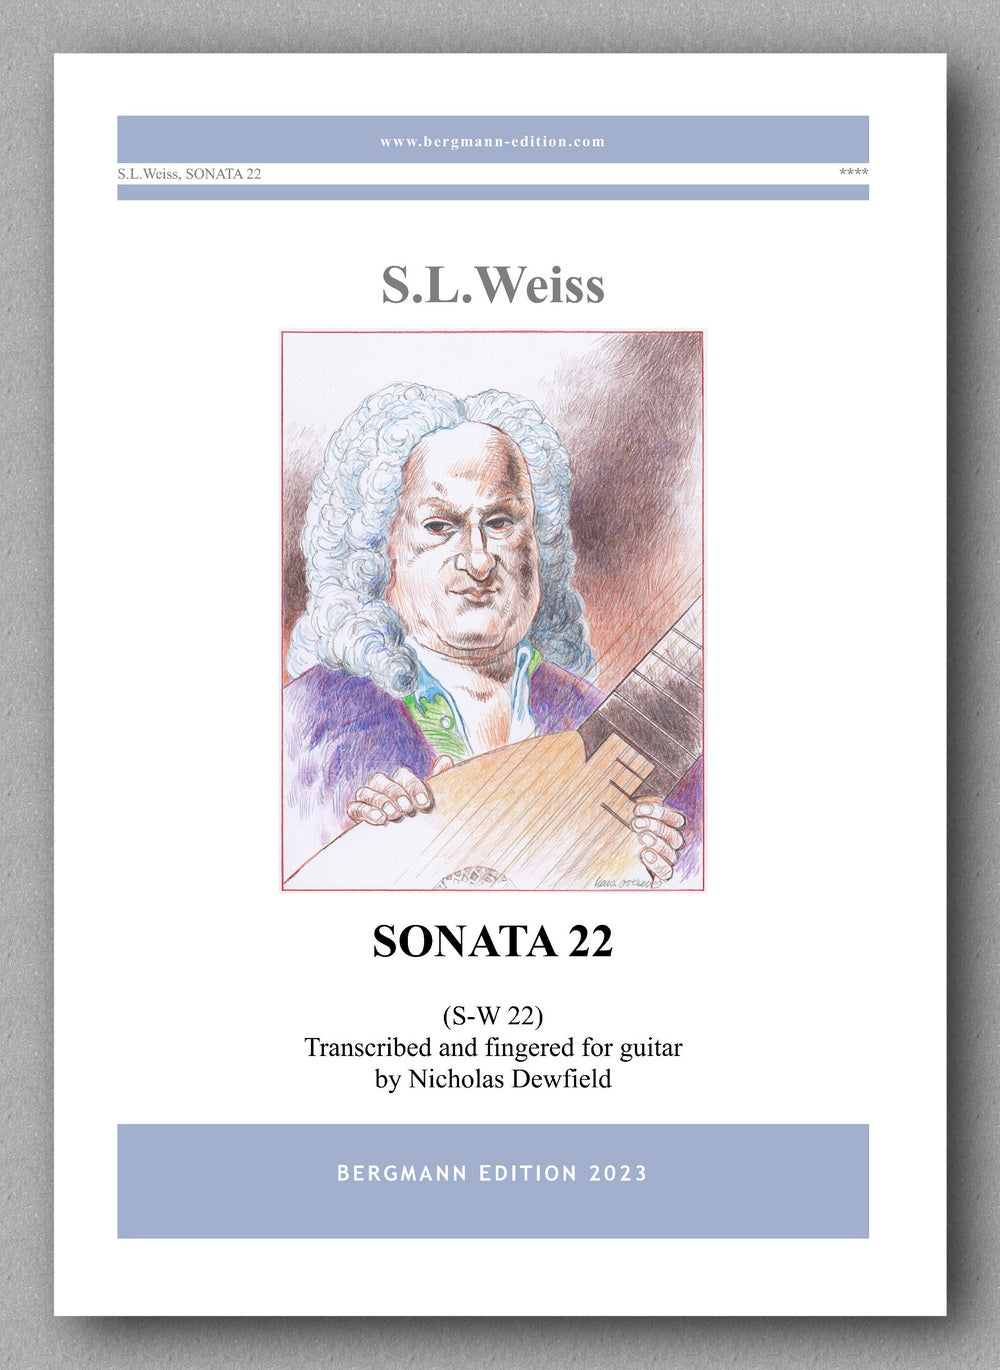 Sylvius Leopold Weiss (1687-1750), Sonata No. 22 - preview of the cover